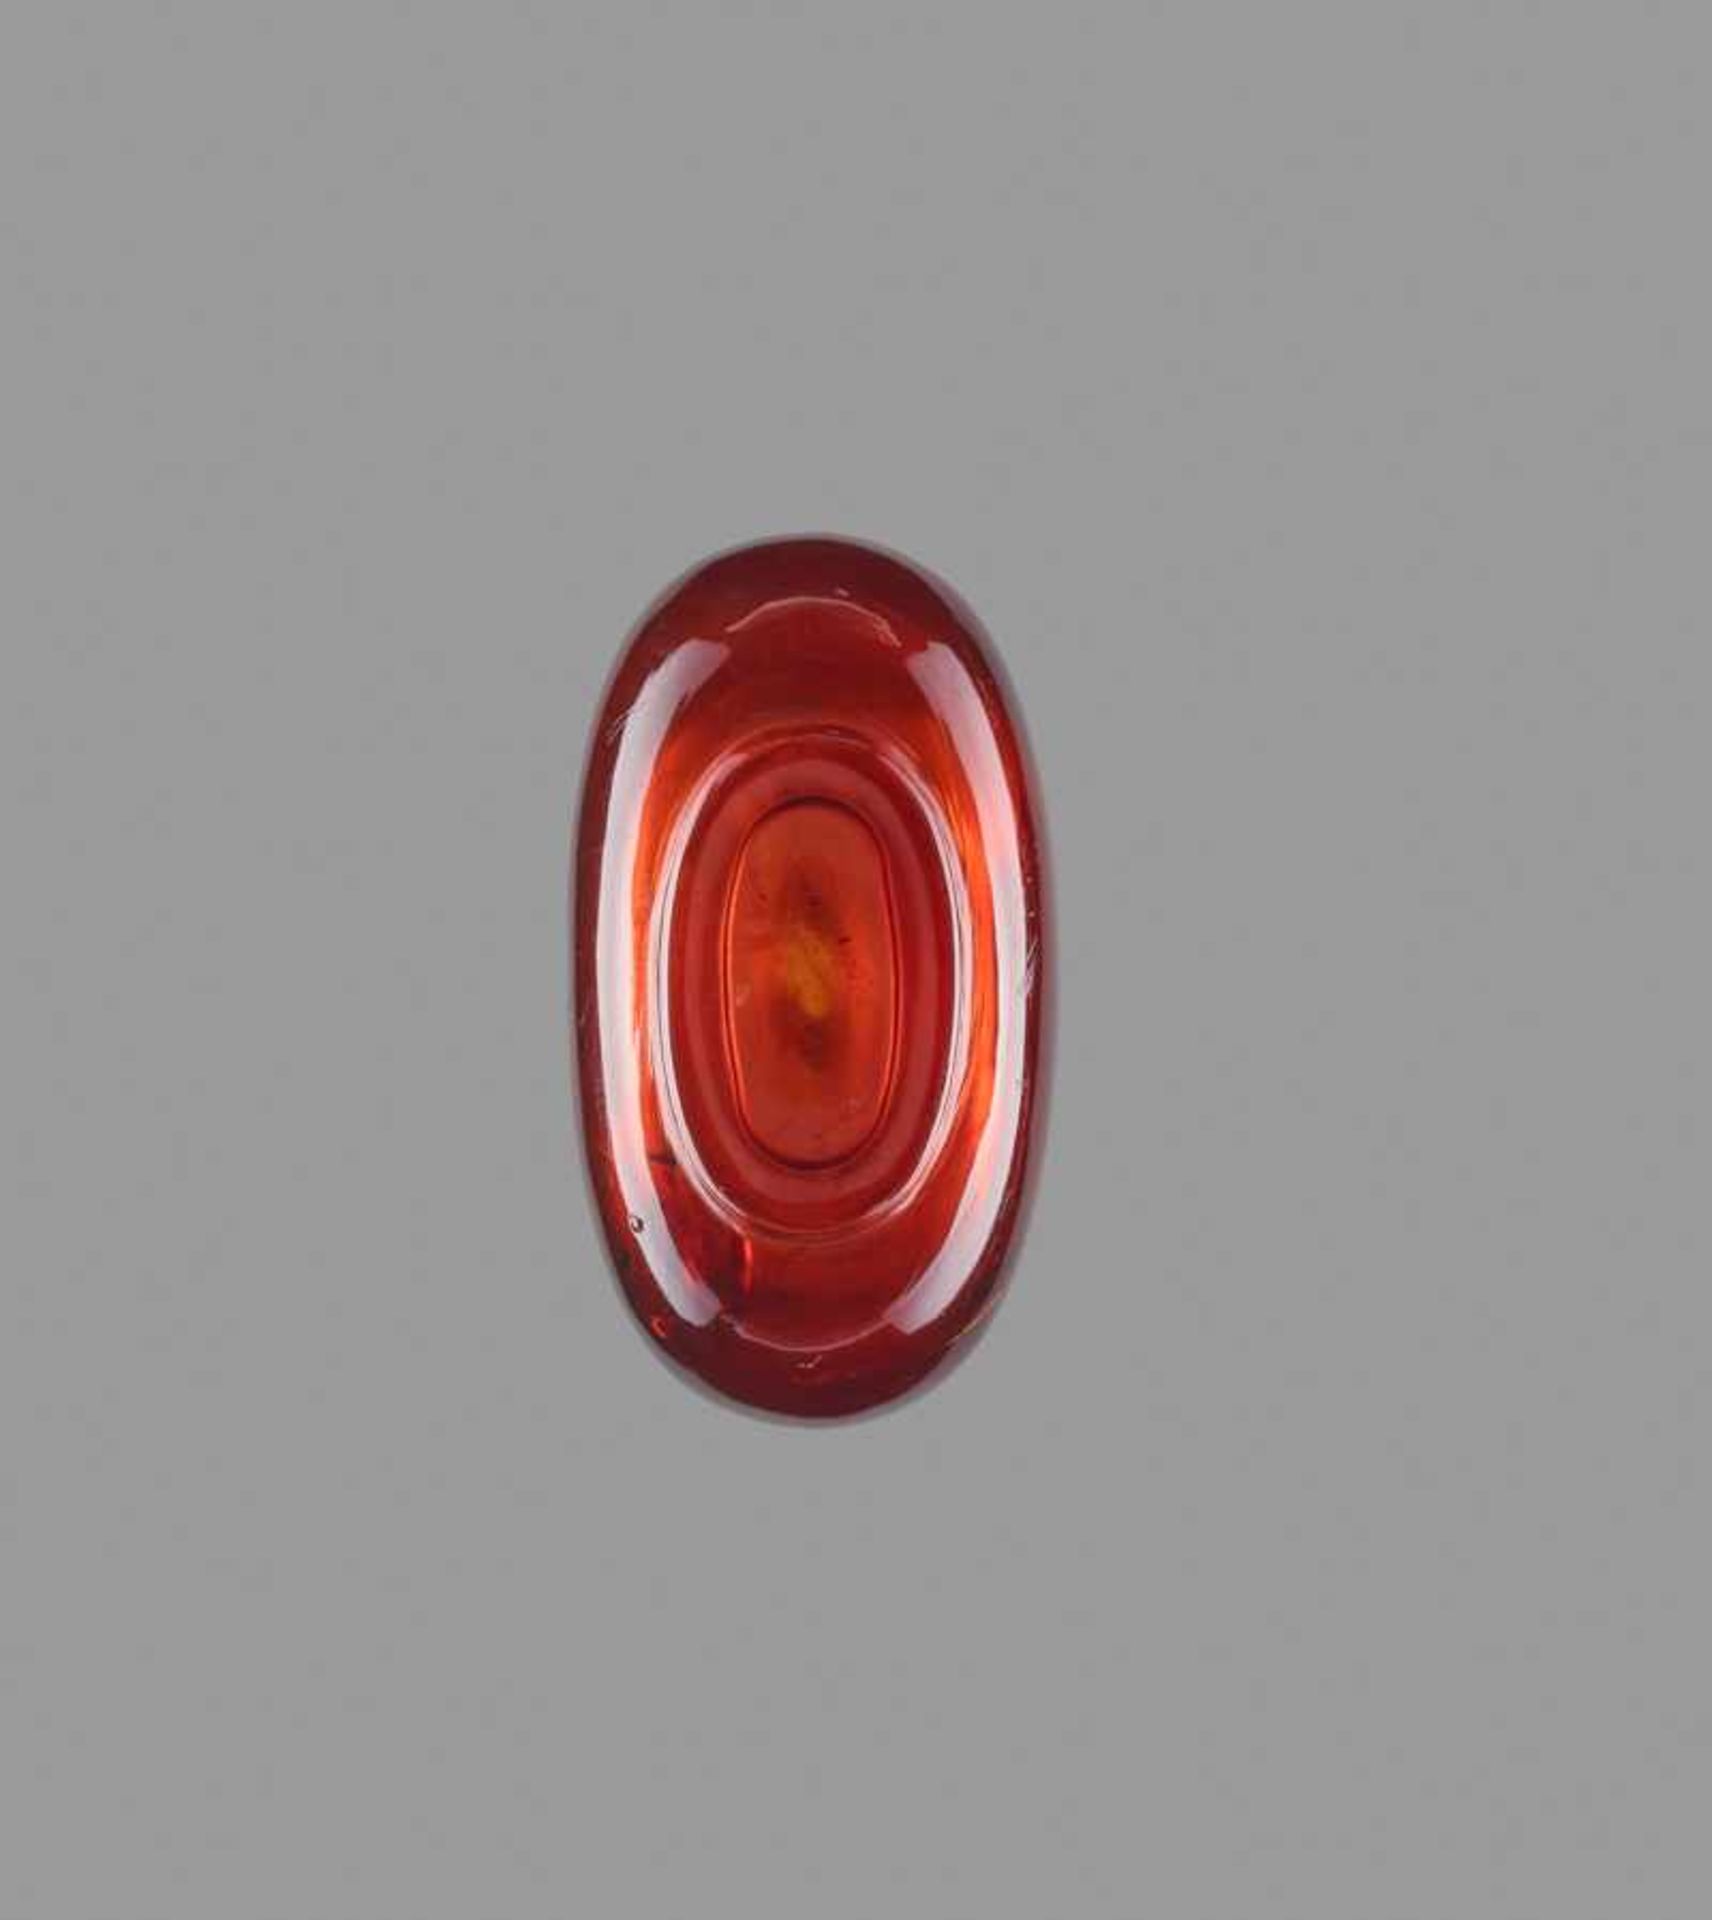 A SMALL PLAIN AMBER SNUFF BOTTLE Transparent amber of even golden-brown color, with a few smaller - Image 6 of 6